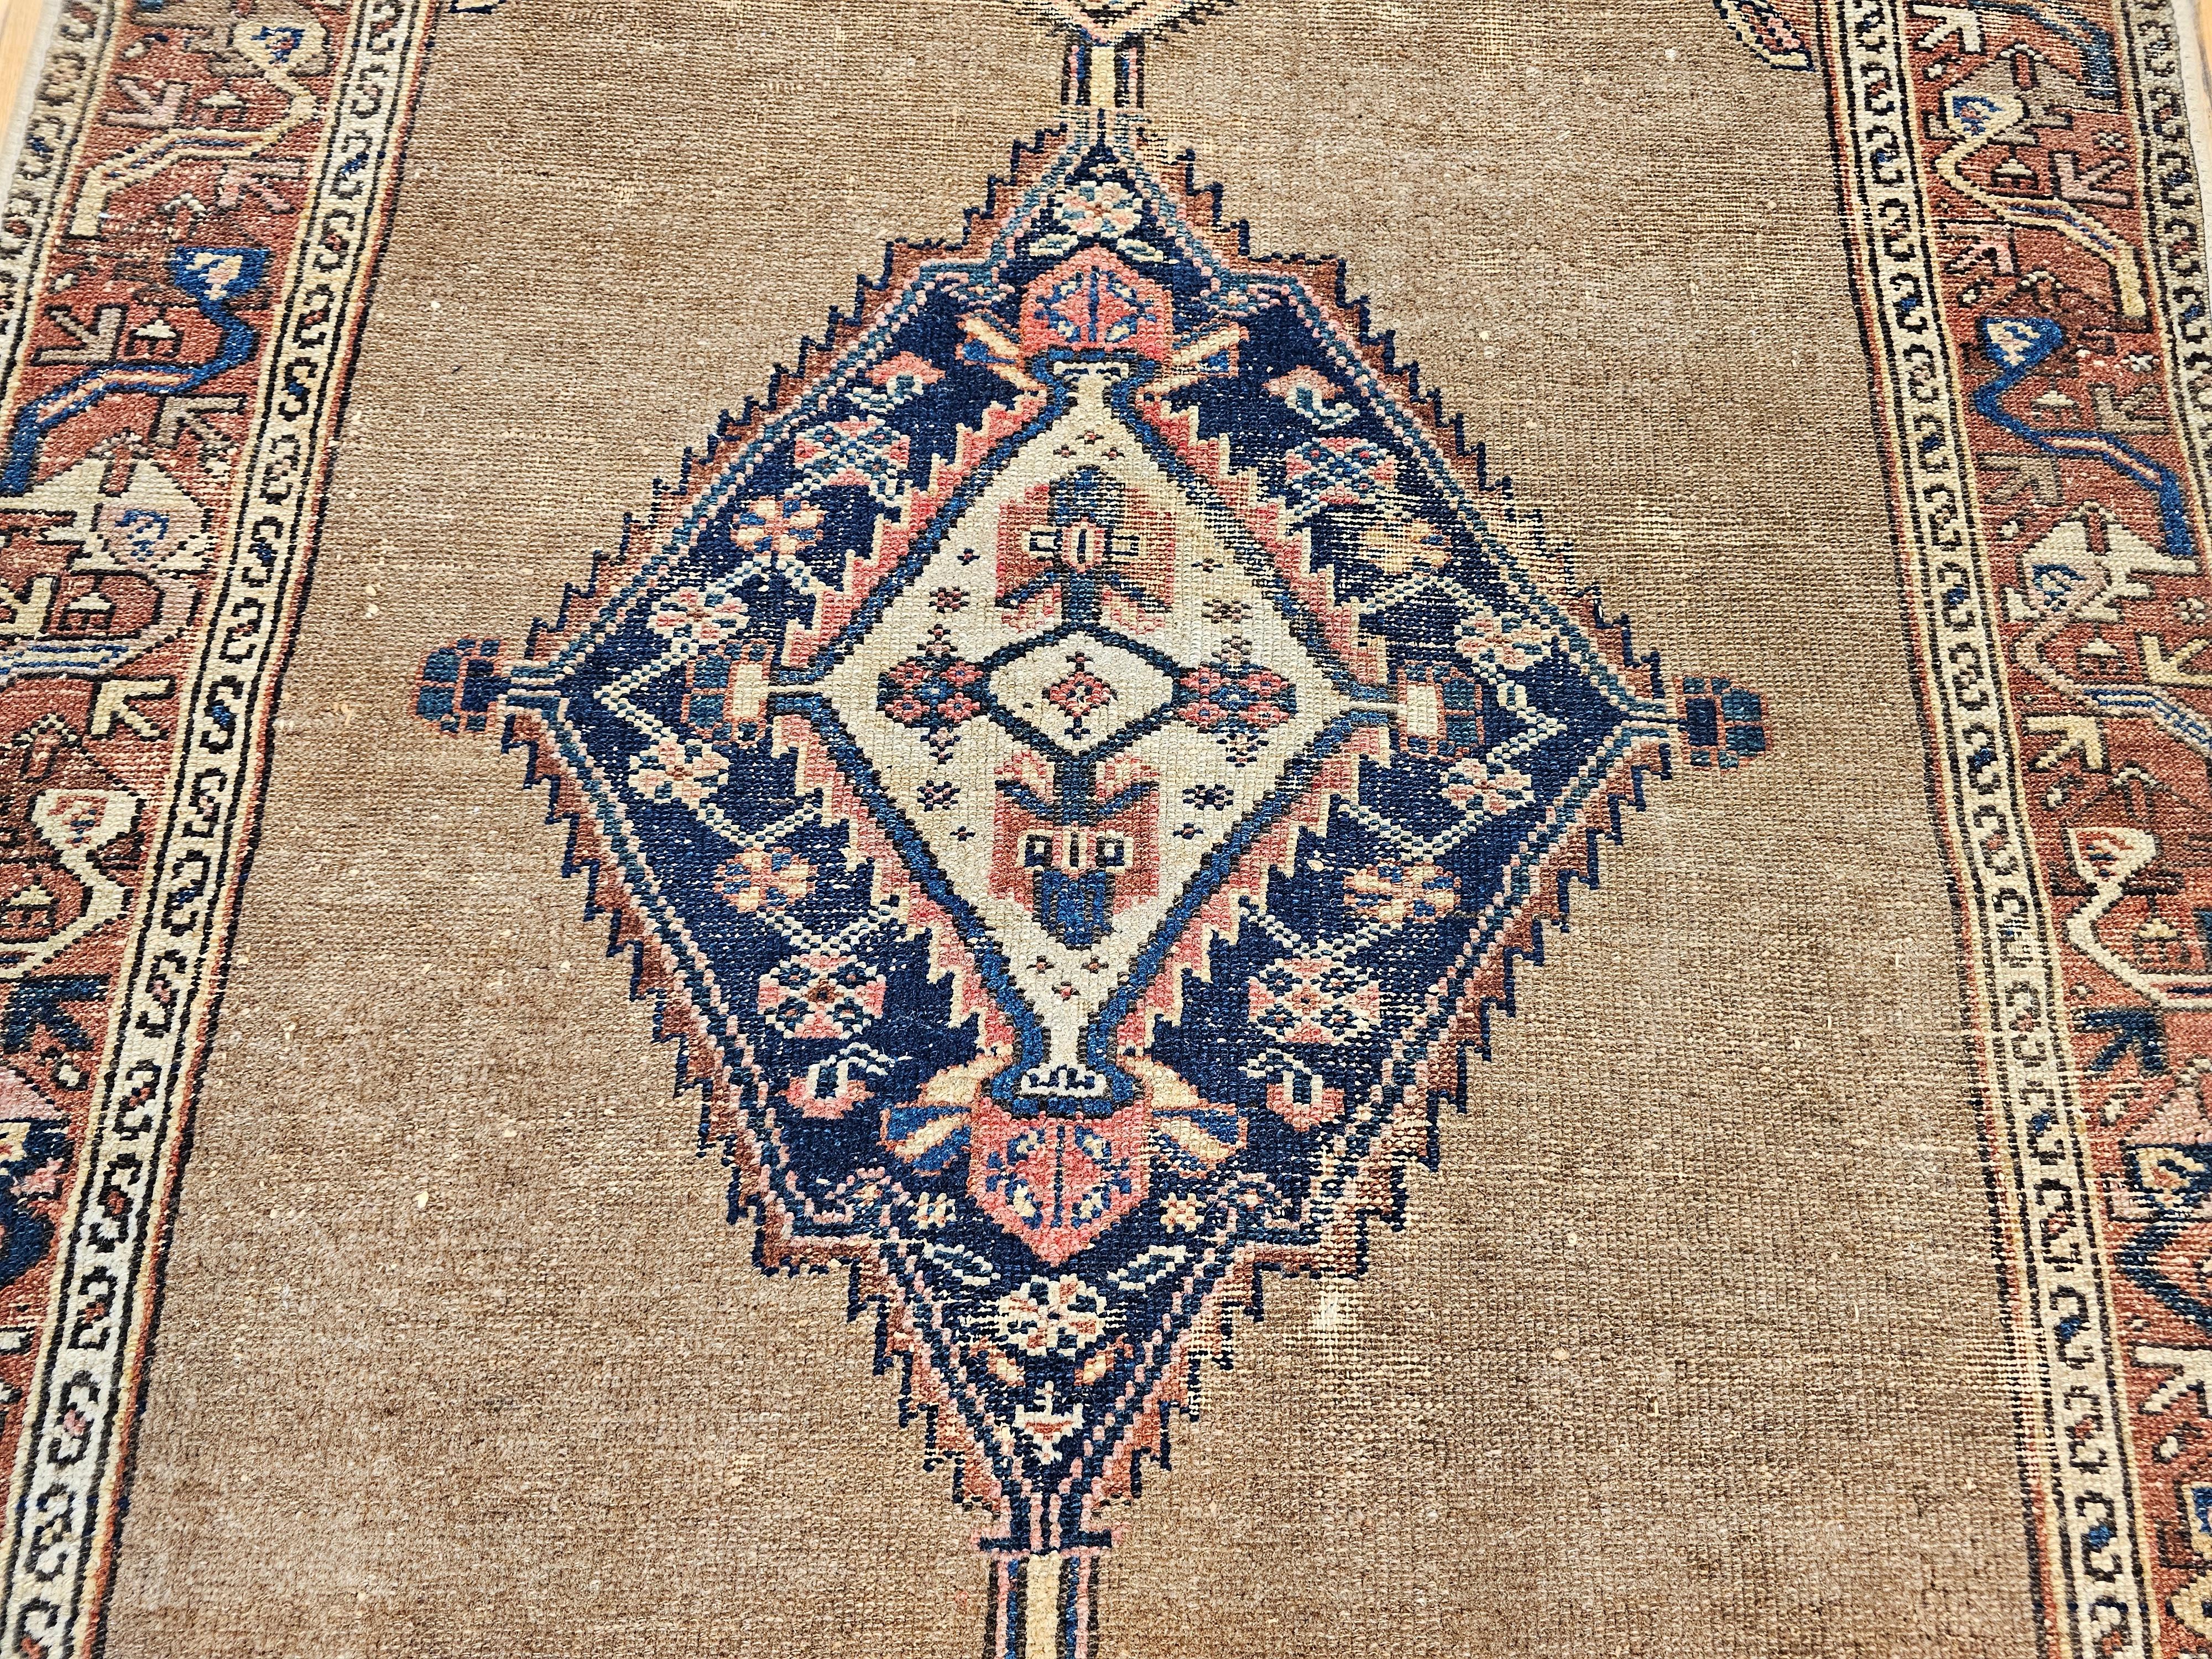 Vintage Persian Camelhair Malayer Area Rug in Camel, Navy, Ivory, Rust Red, Blue For Sale 5